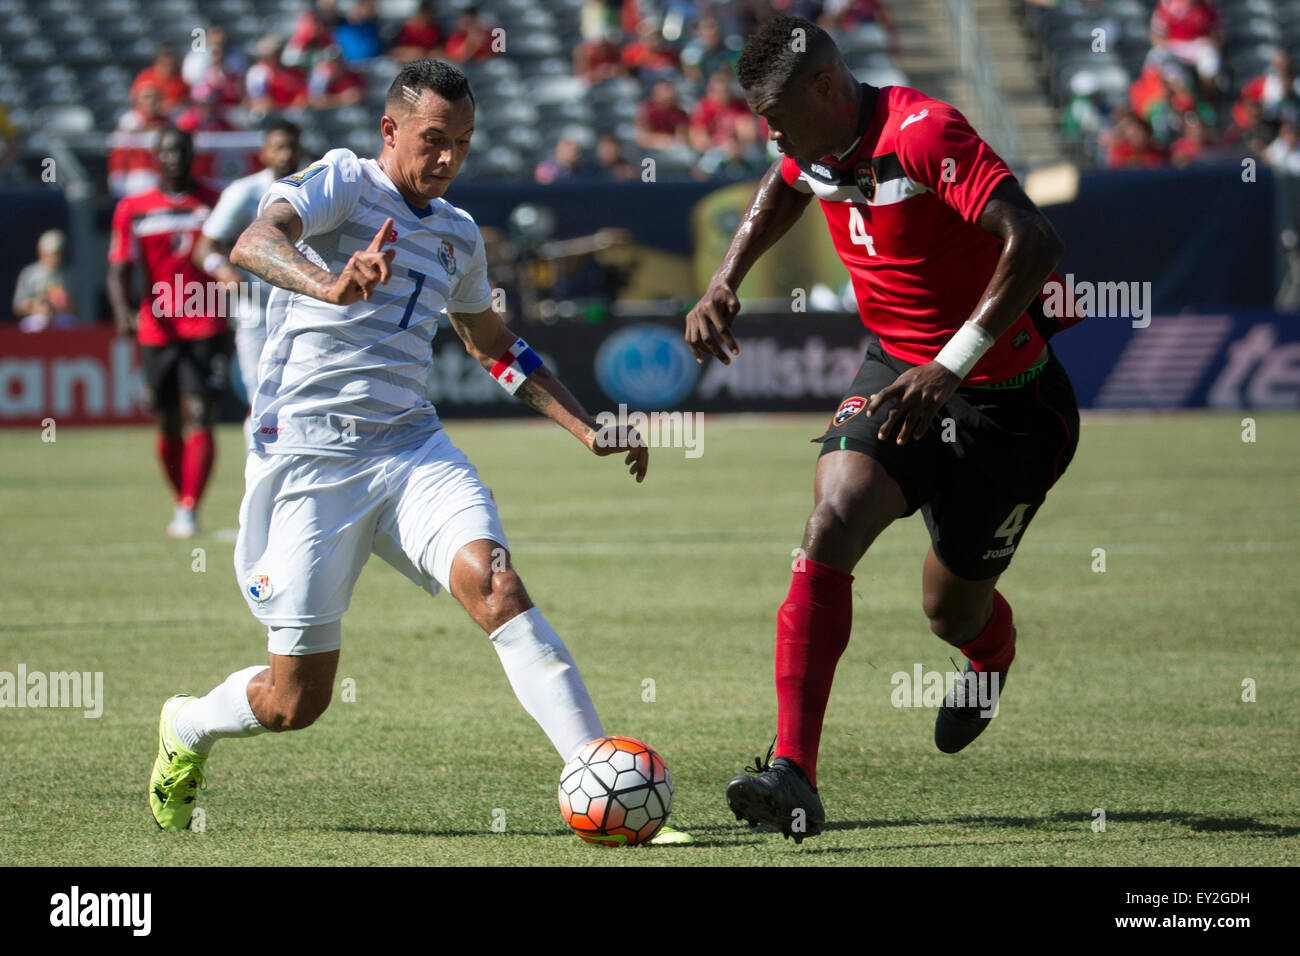 The Match By Shootout. 19th July, 2015. Panama forward Blas Perez (7) in action against Trinidad & Tobago defense Sheldon Bateau (4) during the CONCACAF Gold Cup 2015 Quarterfinal match between the Trinidad & Tobago and Panama at MetLife Stadium in East Rutherford, New Jersey. Panama won the match by shootout. (Christopher Szagola/Cal Sport Media) © csm/Alamy Live News Stock Photo